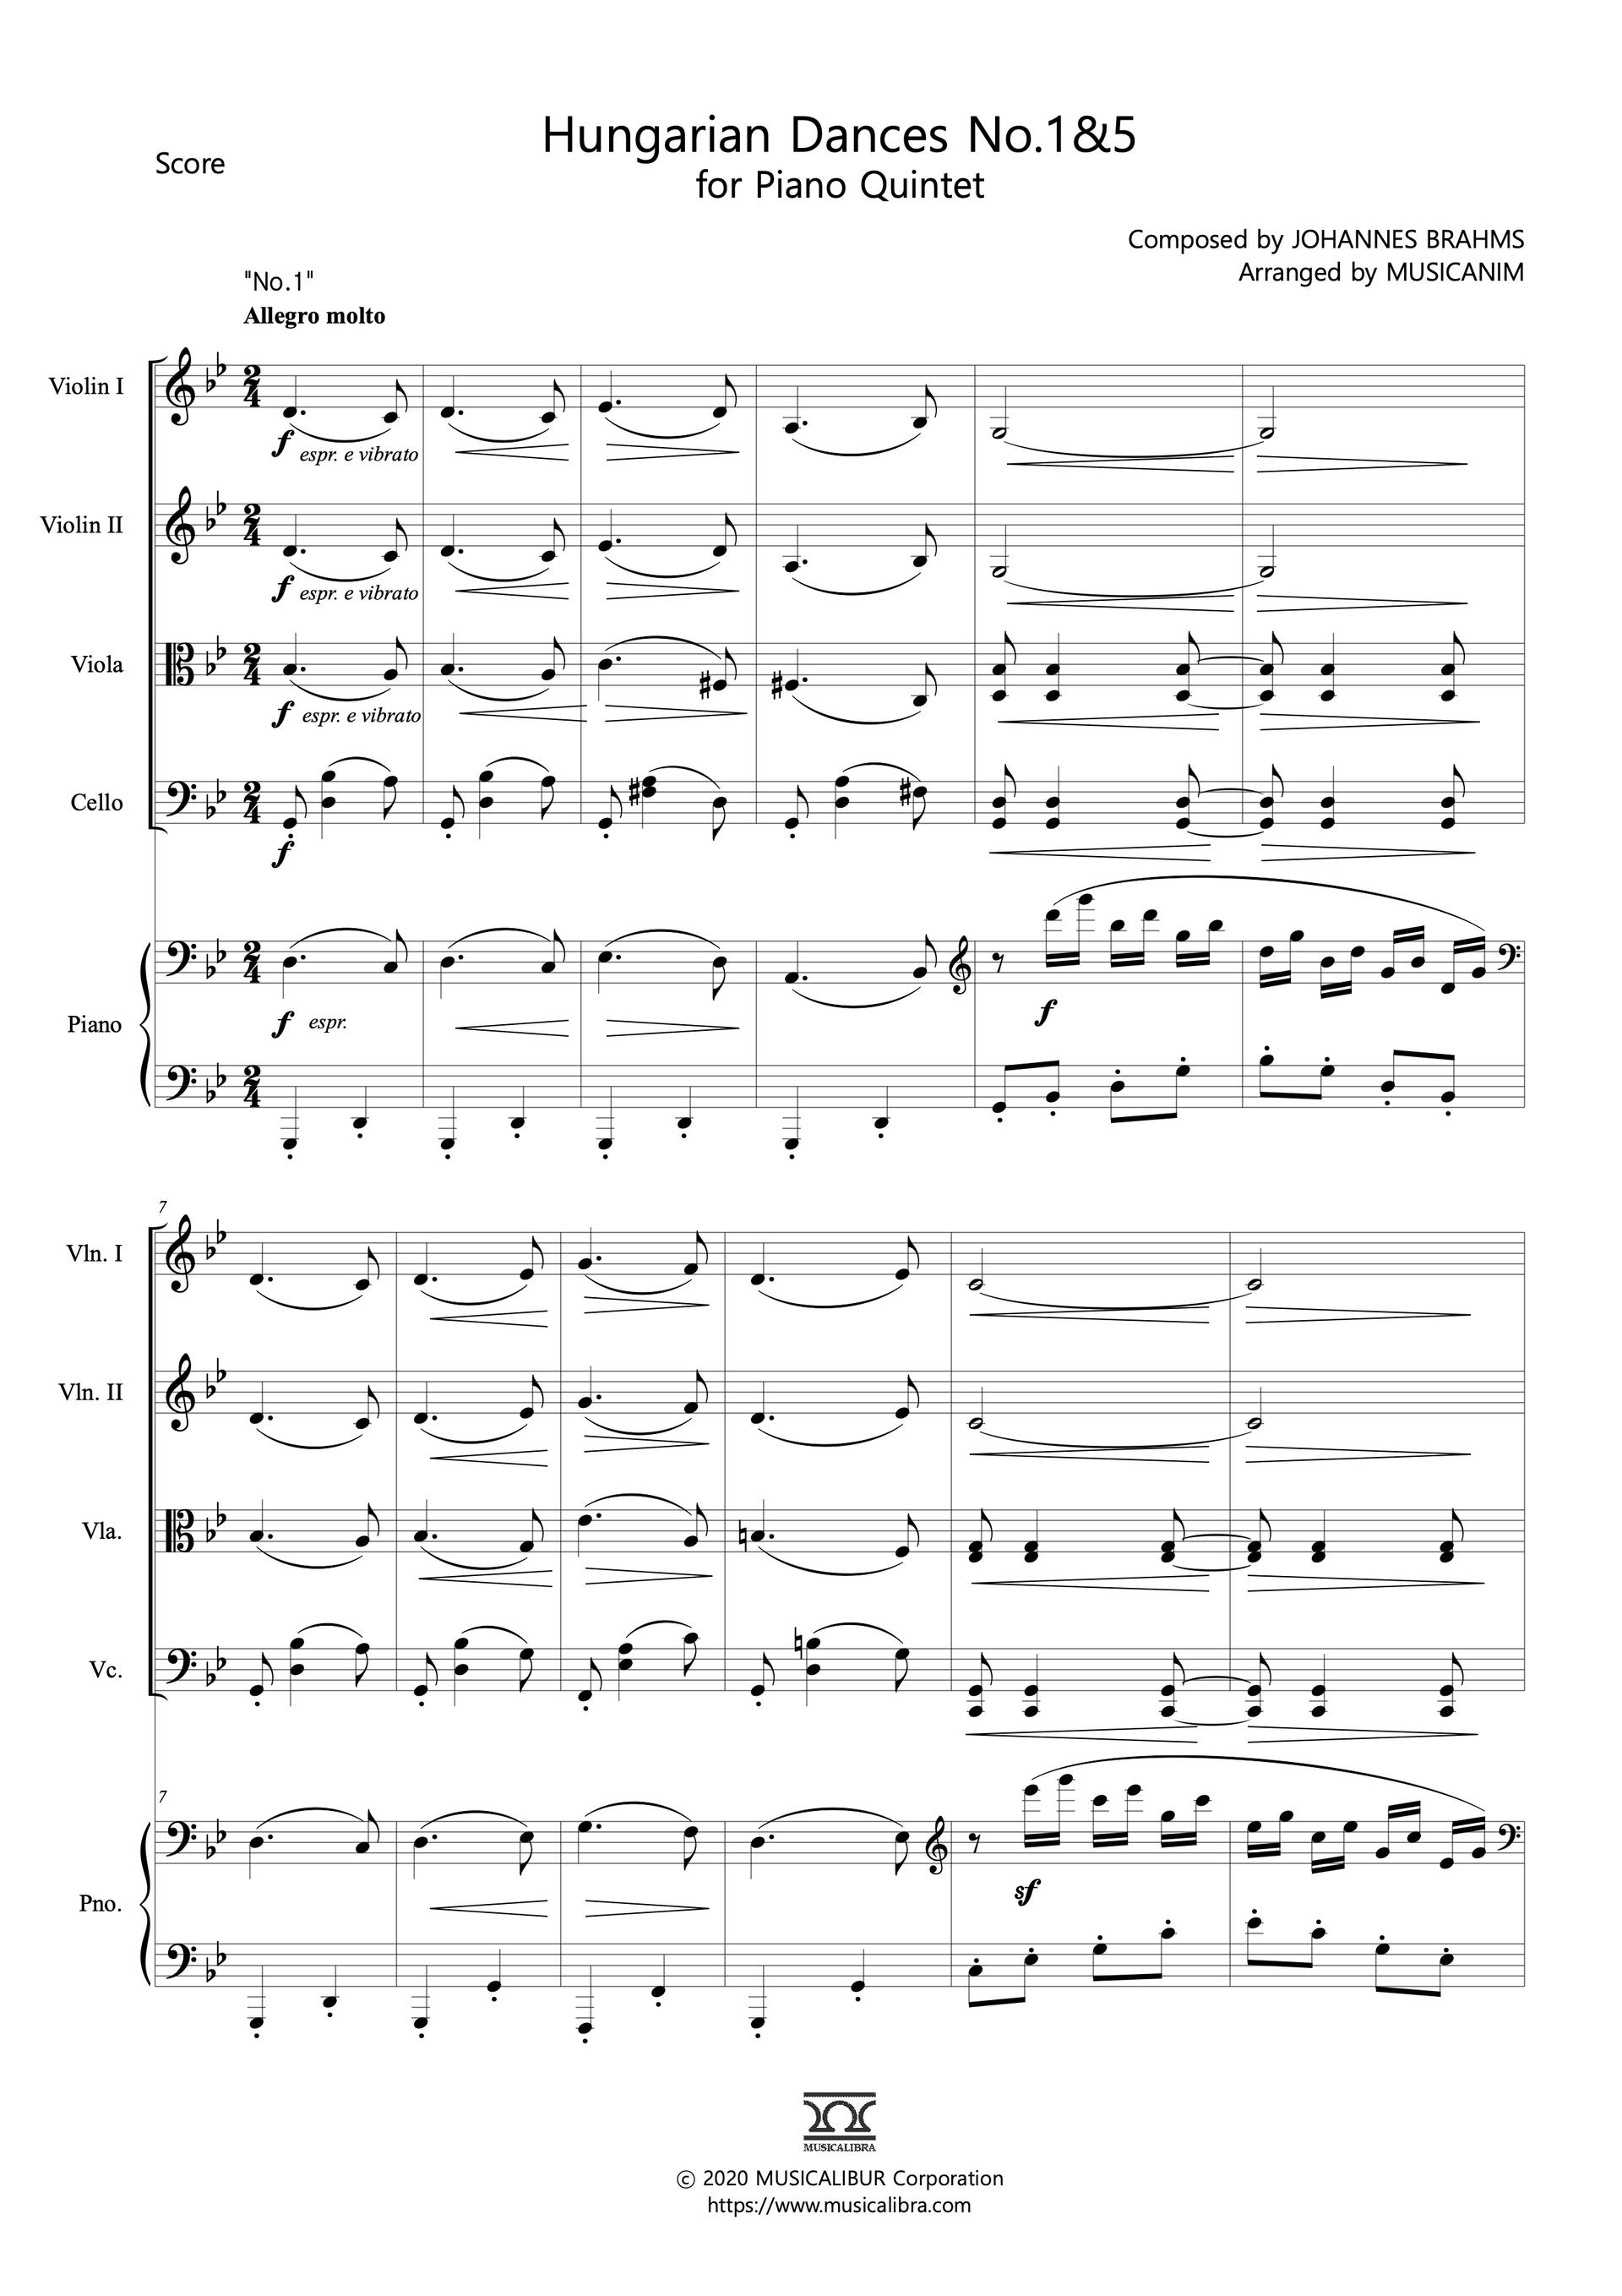 Sheet music of Hungarian Dances No. 1 and 5 arranged for violins, viola, cello and piano quintet preview page 1